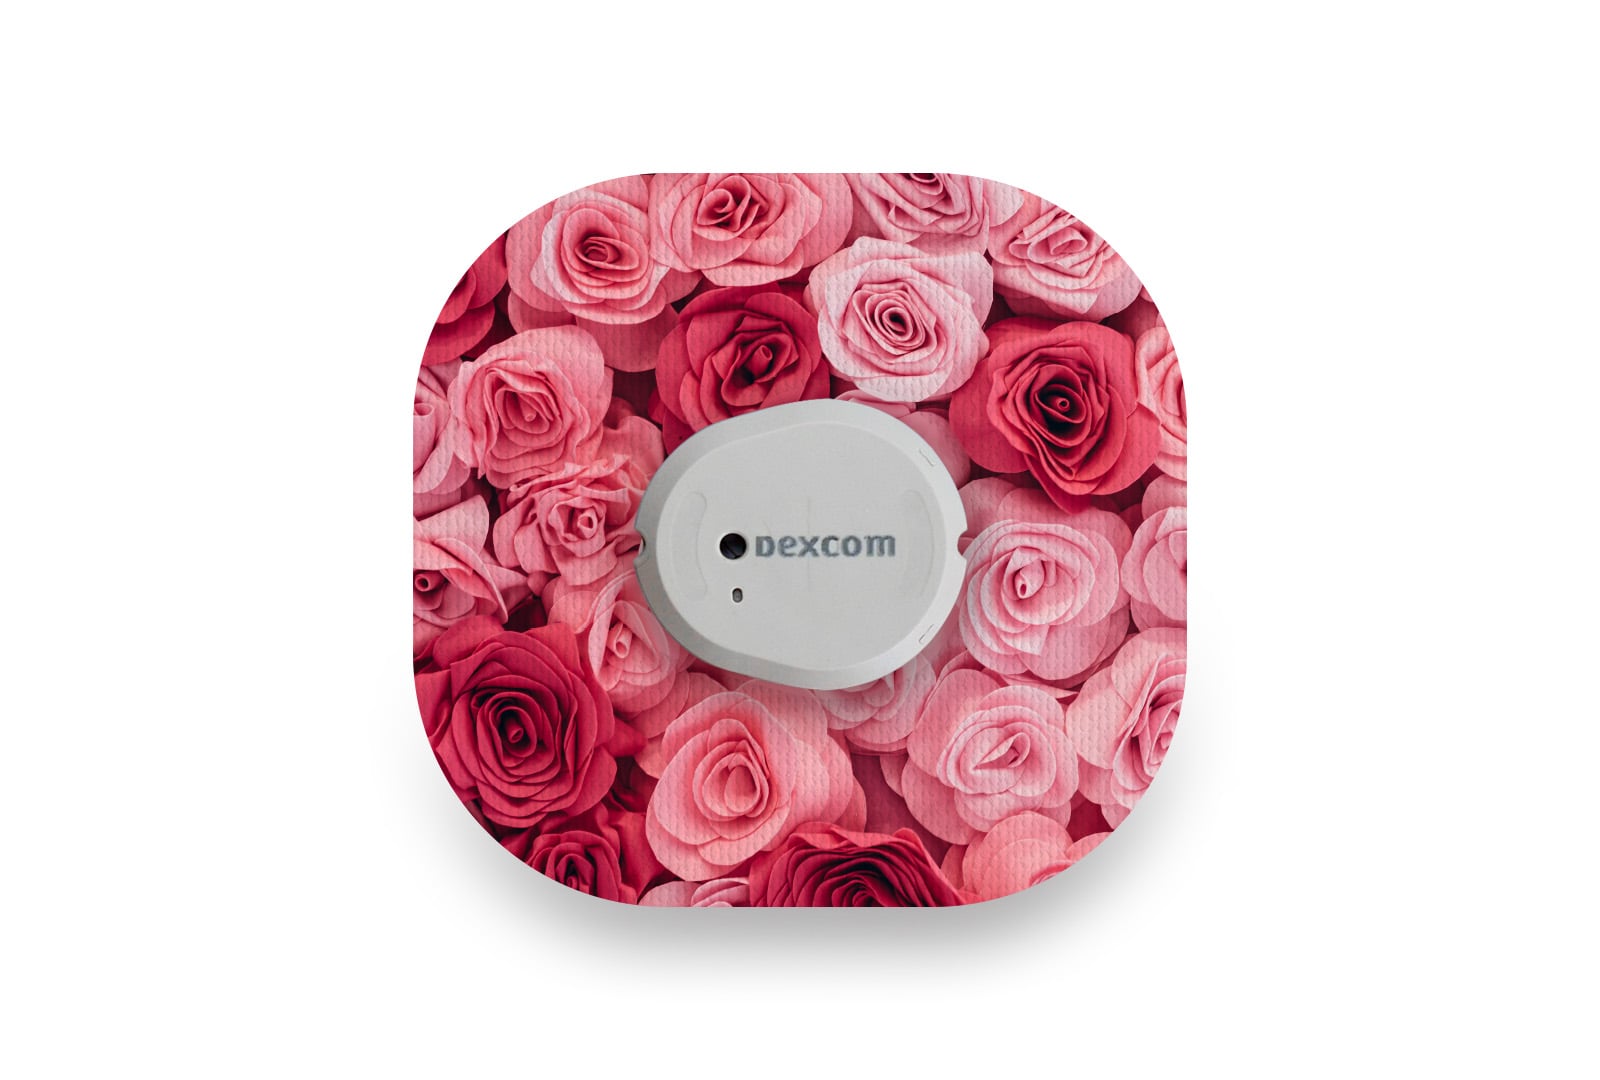 Pretty Pink Rose Patch for Dexcom G7 / One+ diabetes CGMs and insulin pumps